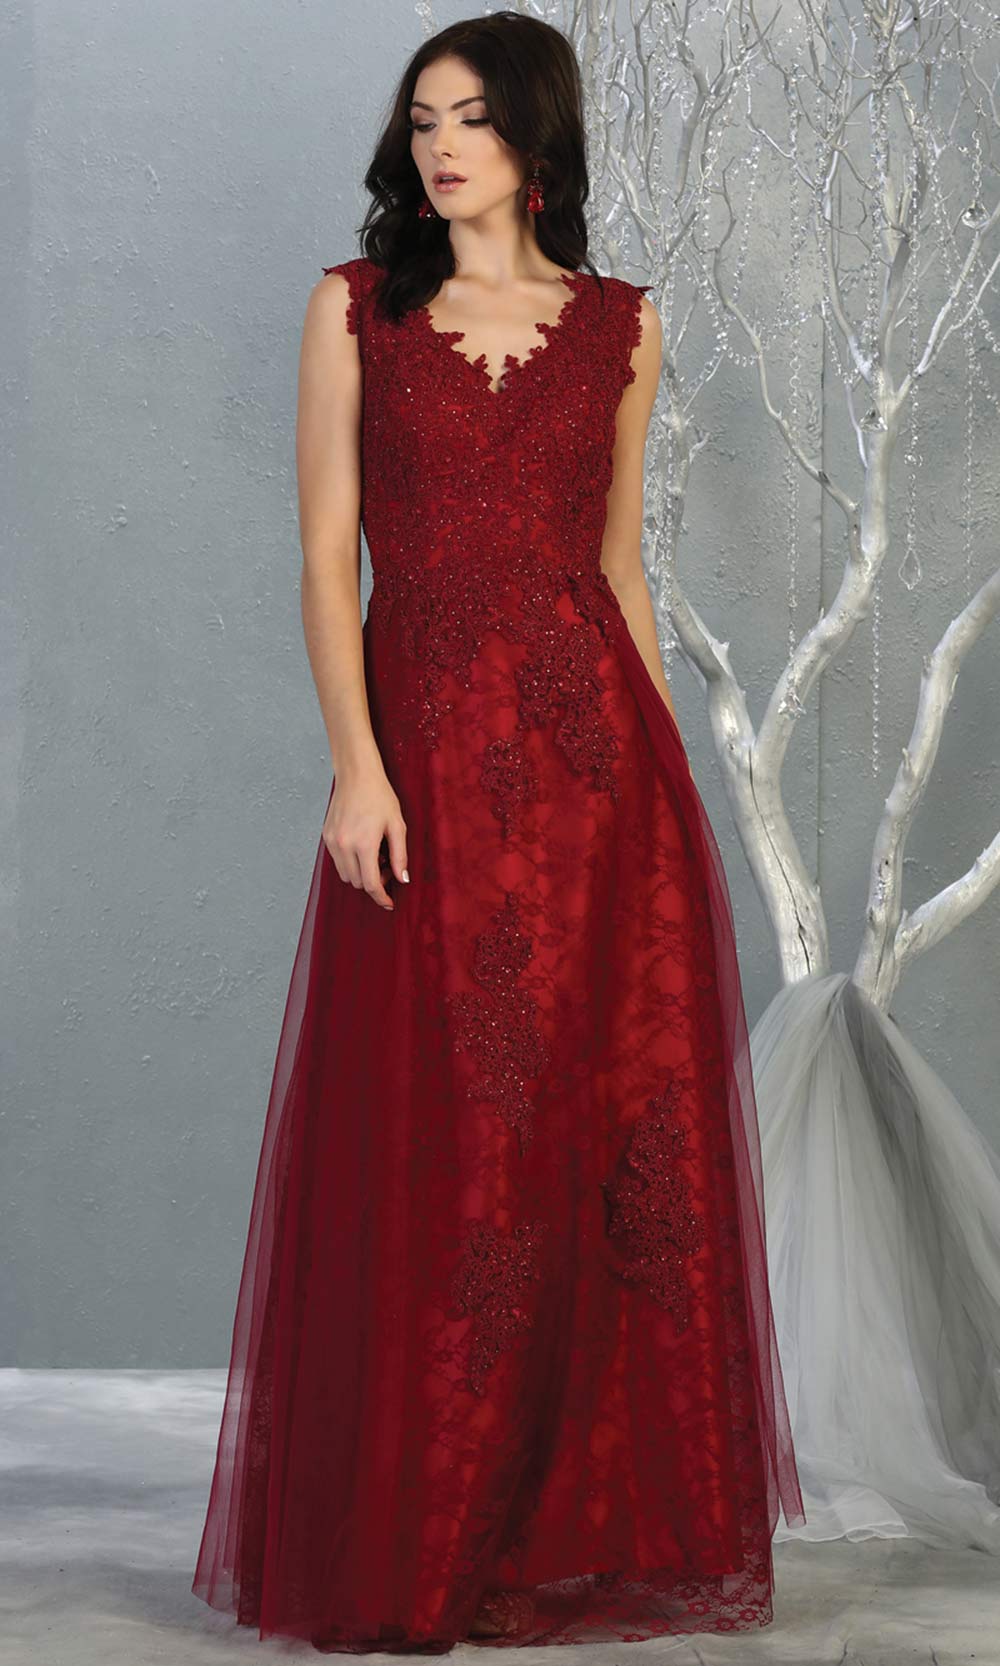 Mayqueen MQ1799 long burgundy red v neck evening fitted dress. Full length dark red lace gown w/skirt overlay is perfect for  enagagement/e-shoot dress, formal wedding guest, indowestern gown, evening party dress, prom, bridesmaid. Plus sizes avail.jpg